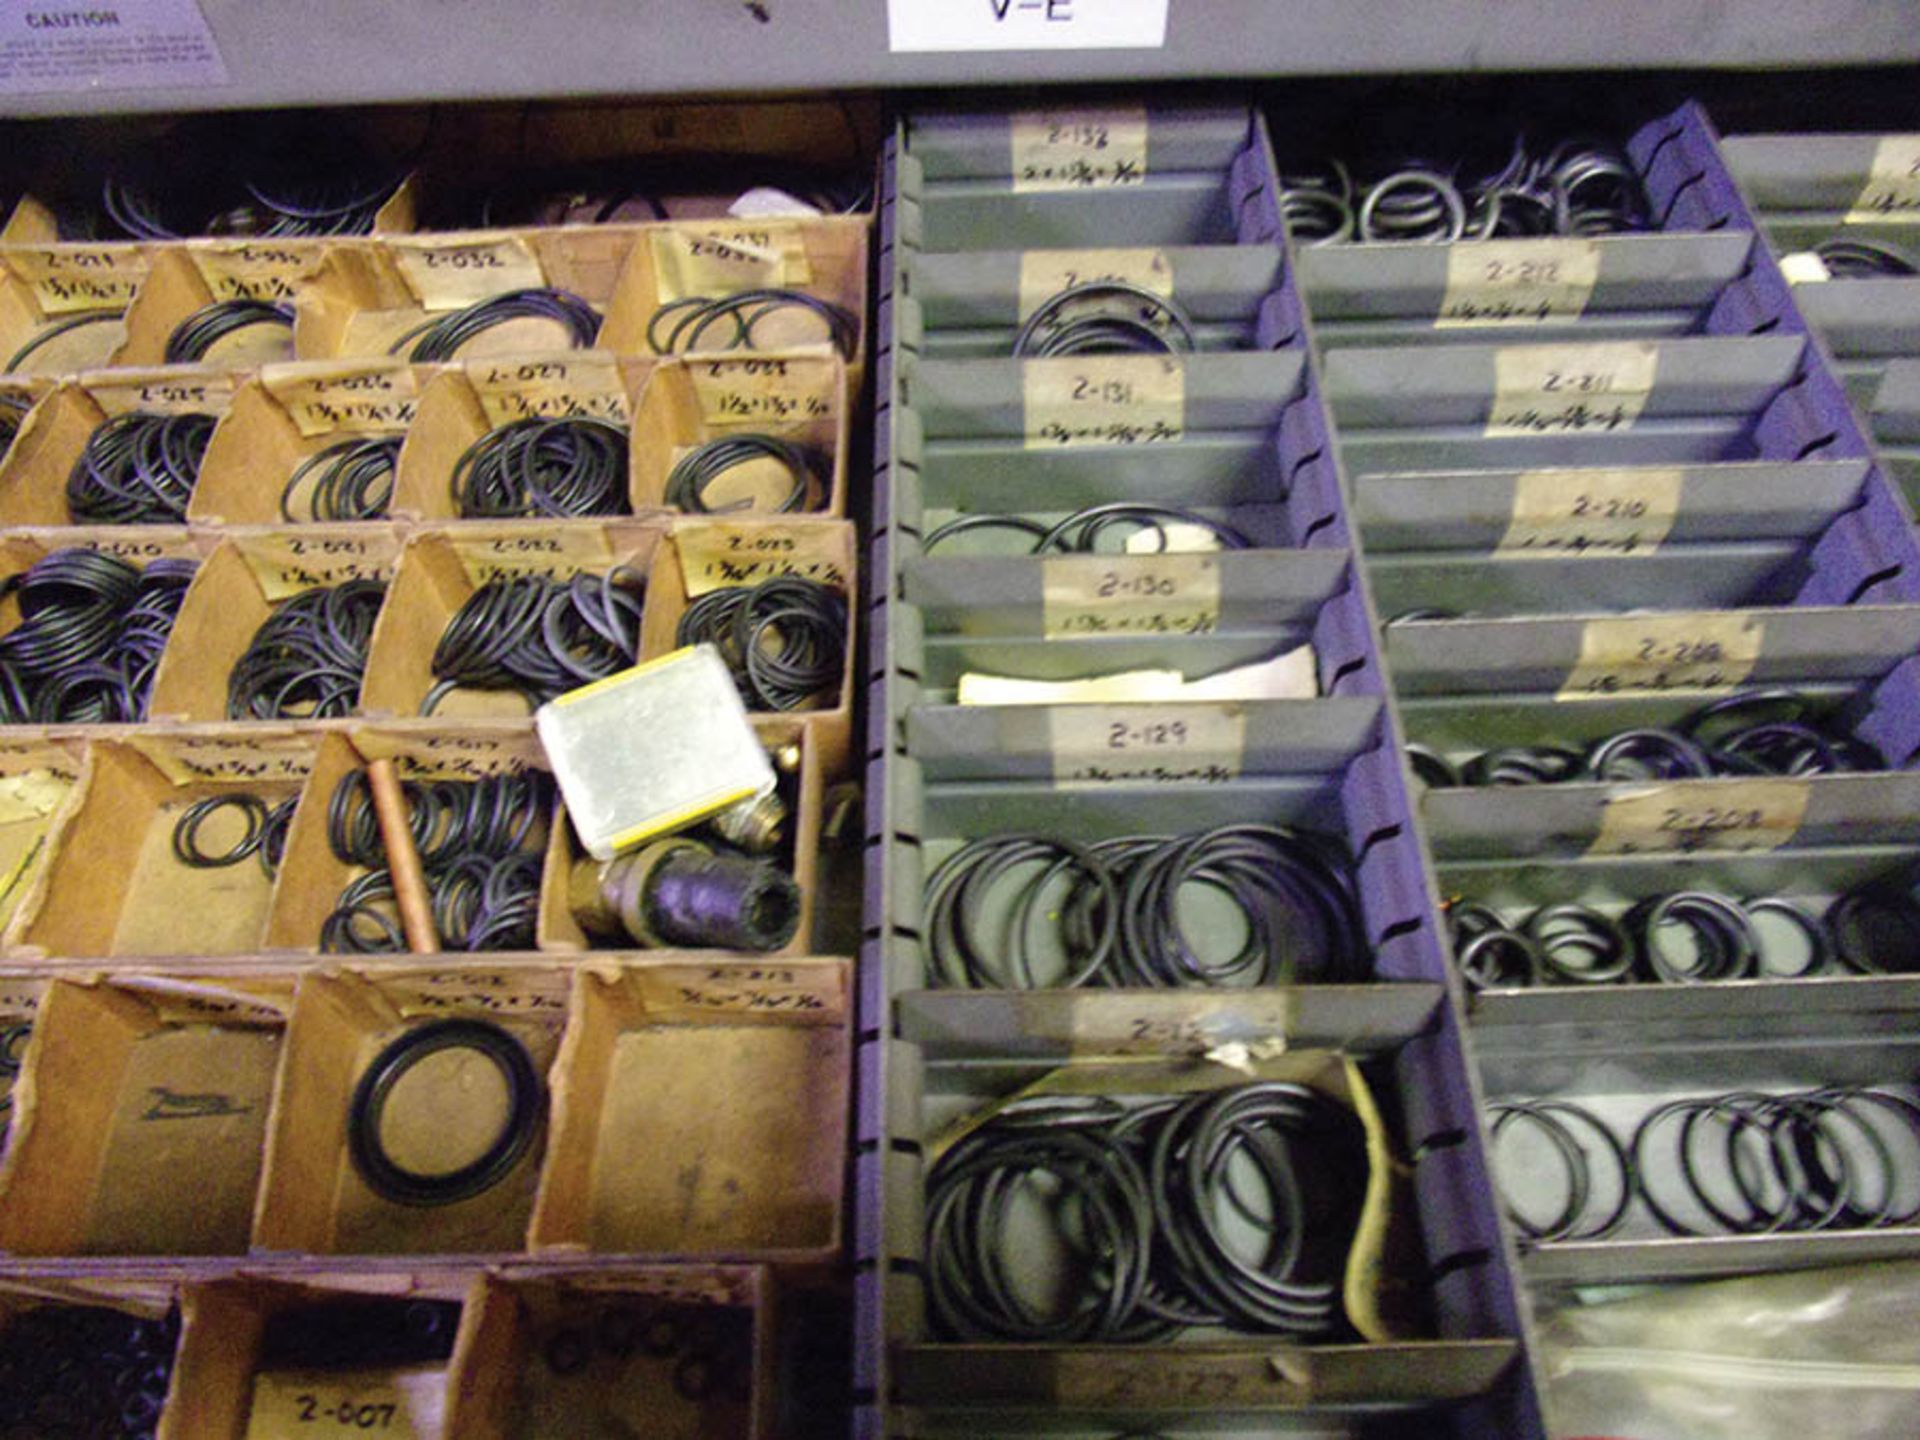 12-DRAWER VIDMAR CABINET WITH CONTENTS; ASSORTED O-RINGS & DOWEL PINS - Image 2 of 5